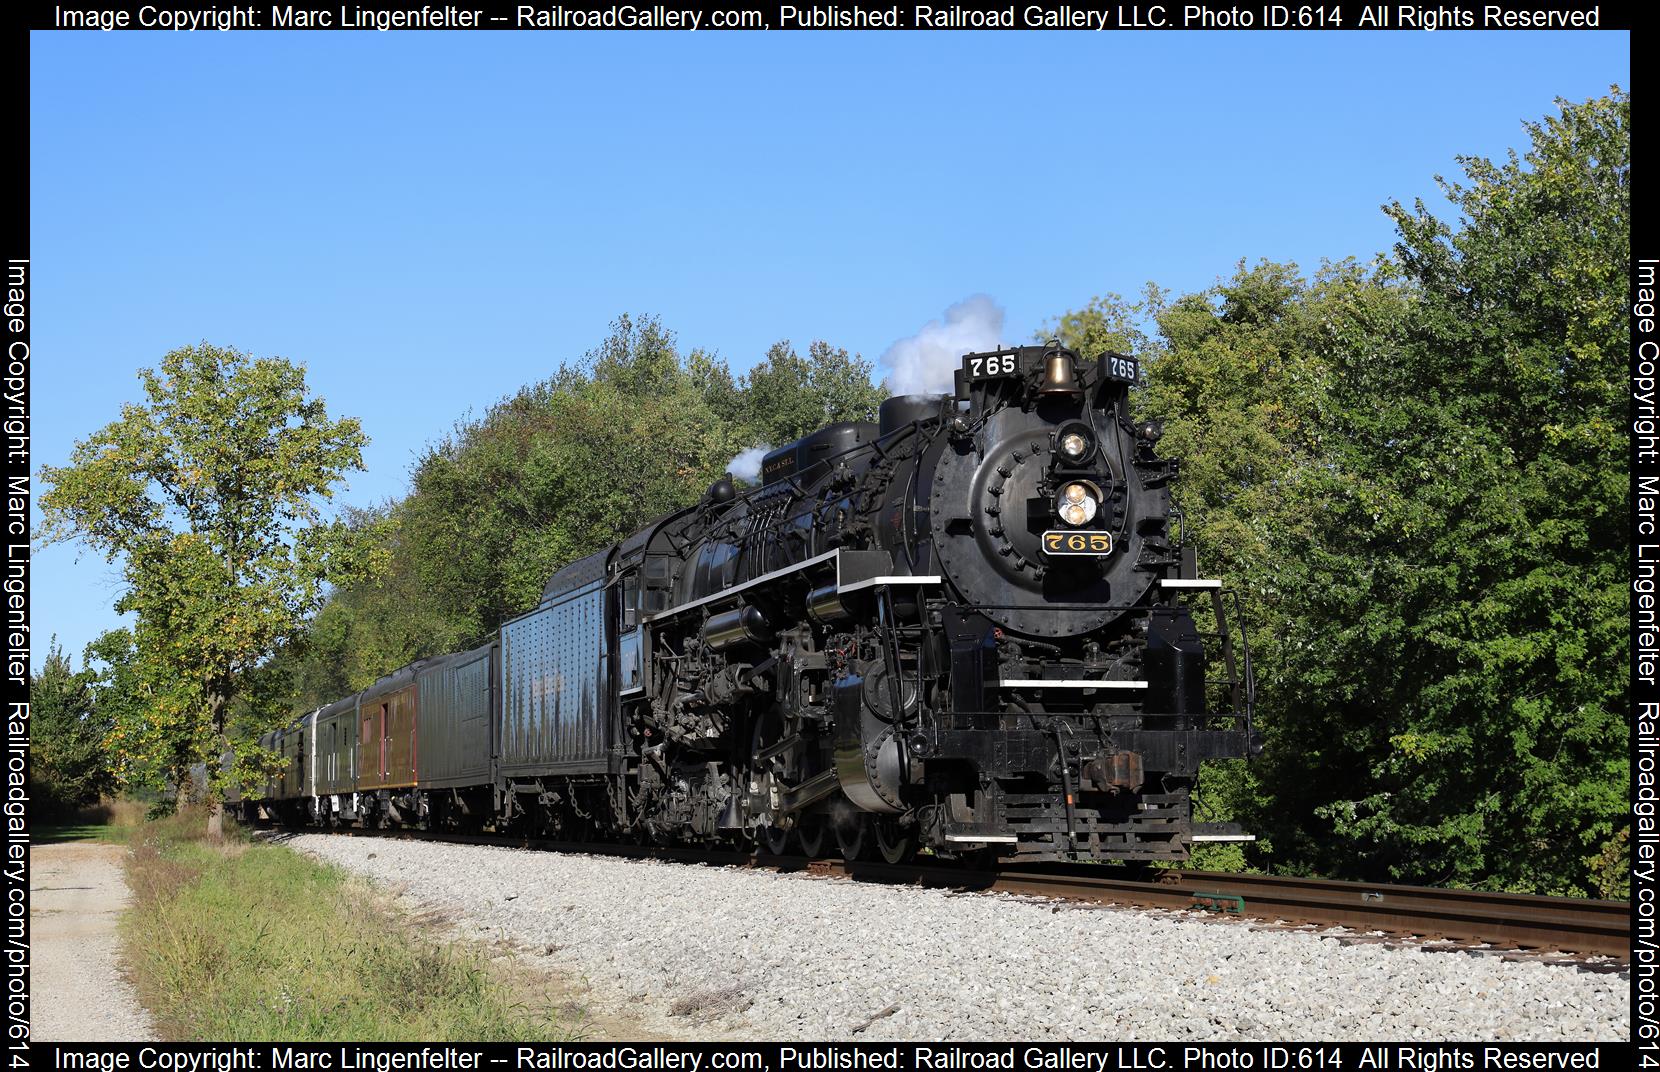 NKP 765 is a class Steam 2-8-4 and  is pictured in Fremont, Indiana, USA.  This was taken along the Northeast Indiana Railroad Main on the Nickel Plate Road. Photo Copyright: Marc Lingenfelter uploaded to Railroad Gallery on 01/23/2023. This photograph of NKP 765 was taken on Saturday, October 01, 2022. All Rights Reserved. 